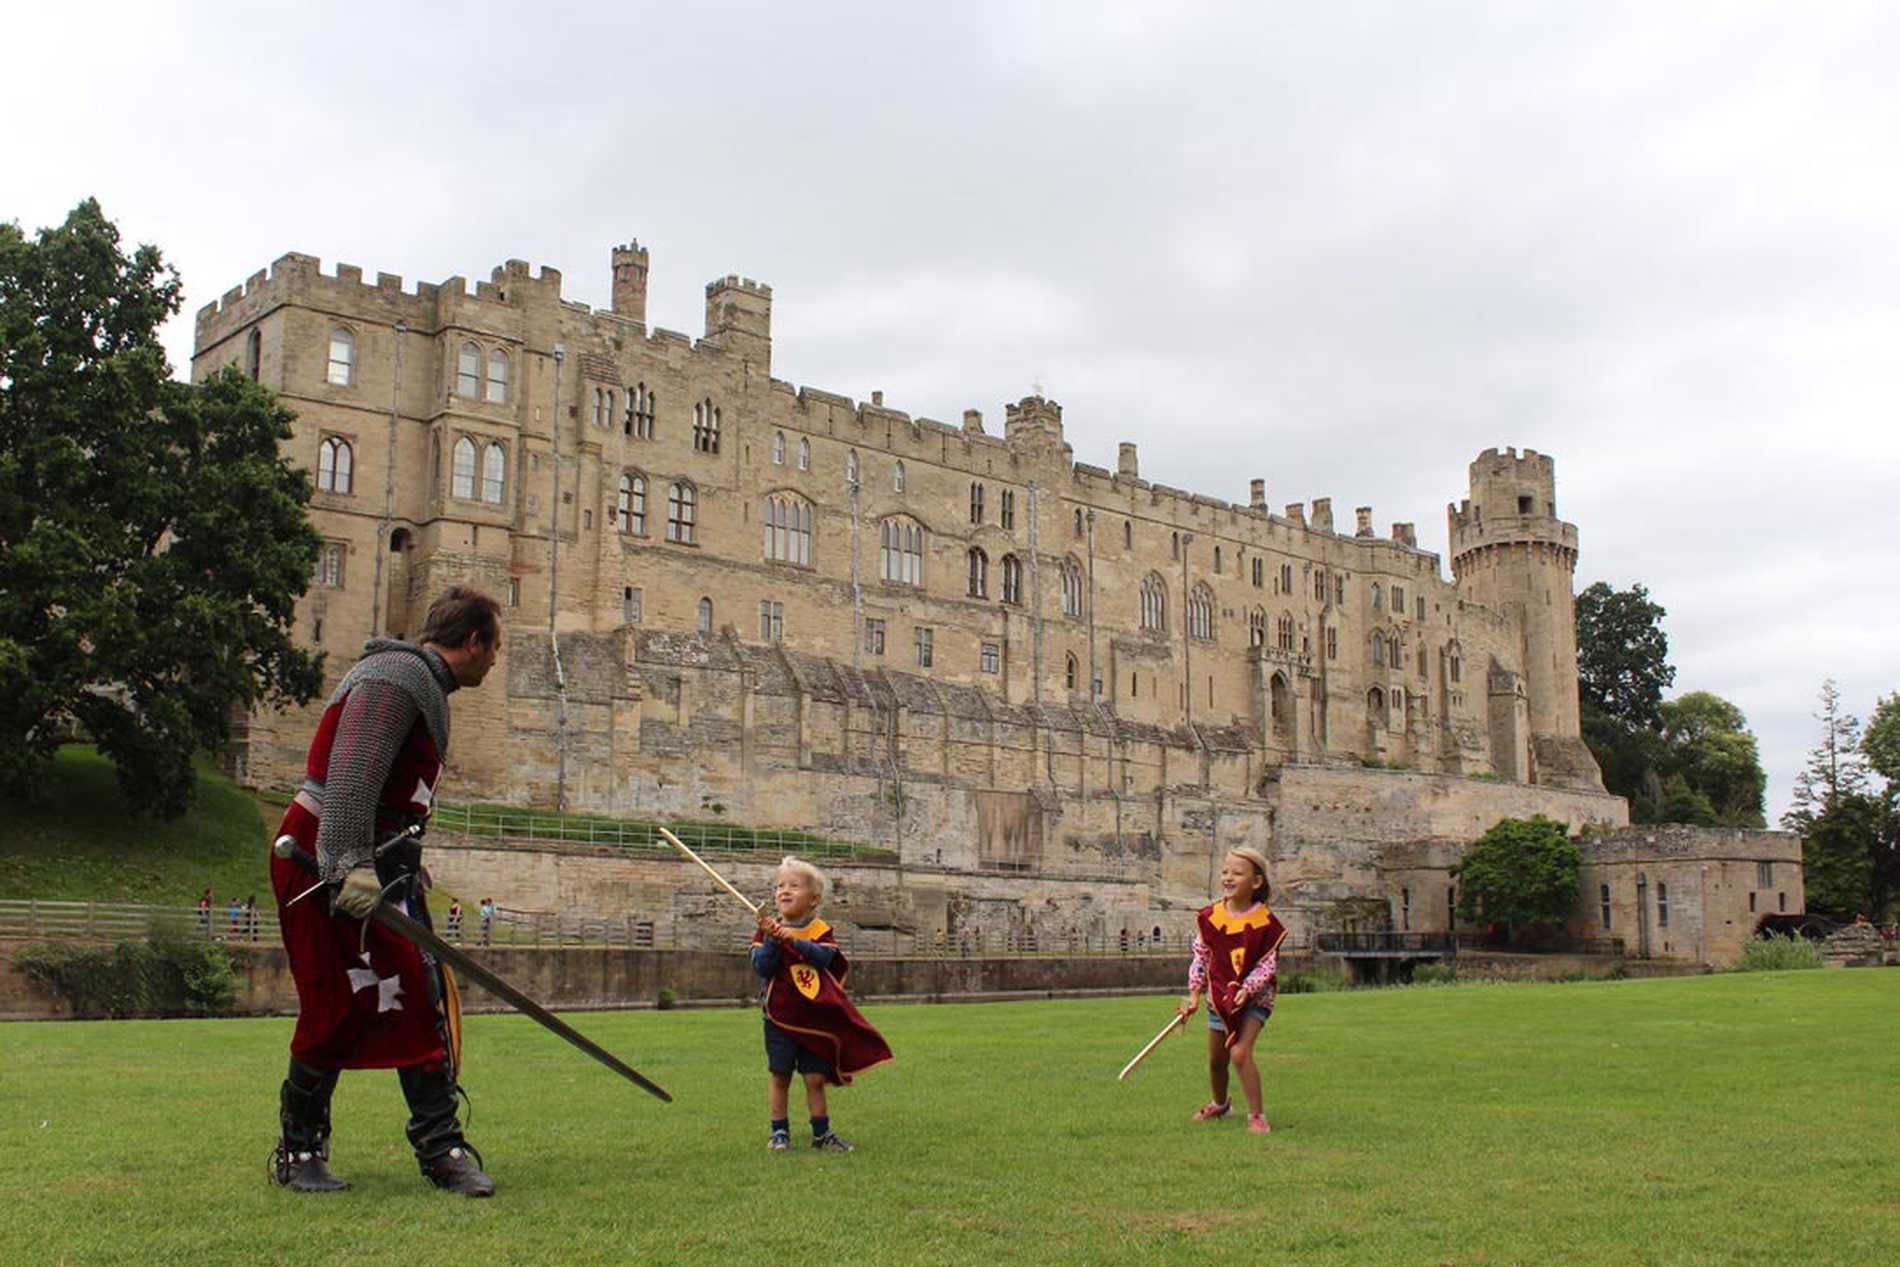 Hunor and his sister, Dorka fighting a knight with Warwick Castle in the background.